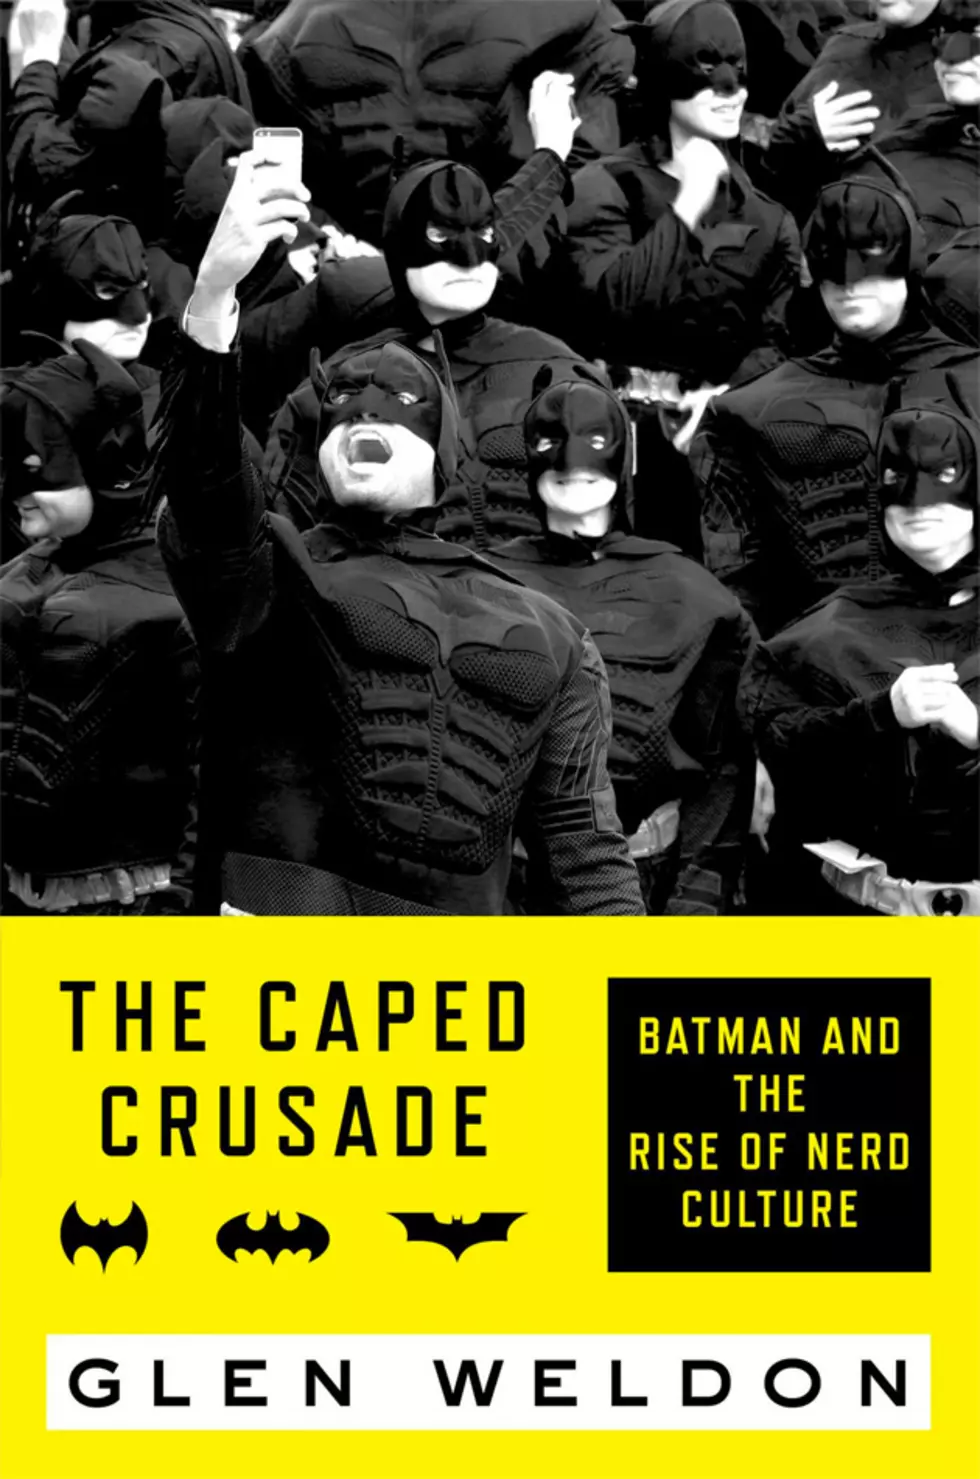 Glen Weldon On &#8216;The Caped Crusade&#8217; And How Batman Helped To Build Nerd Culture [Interview]